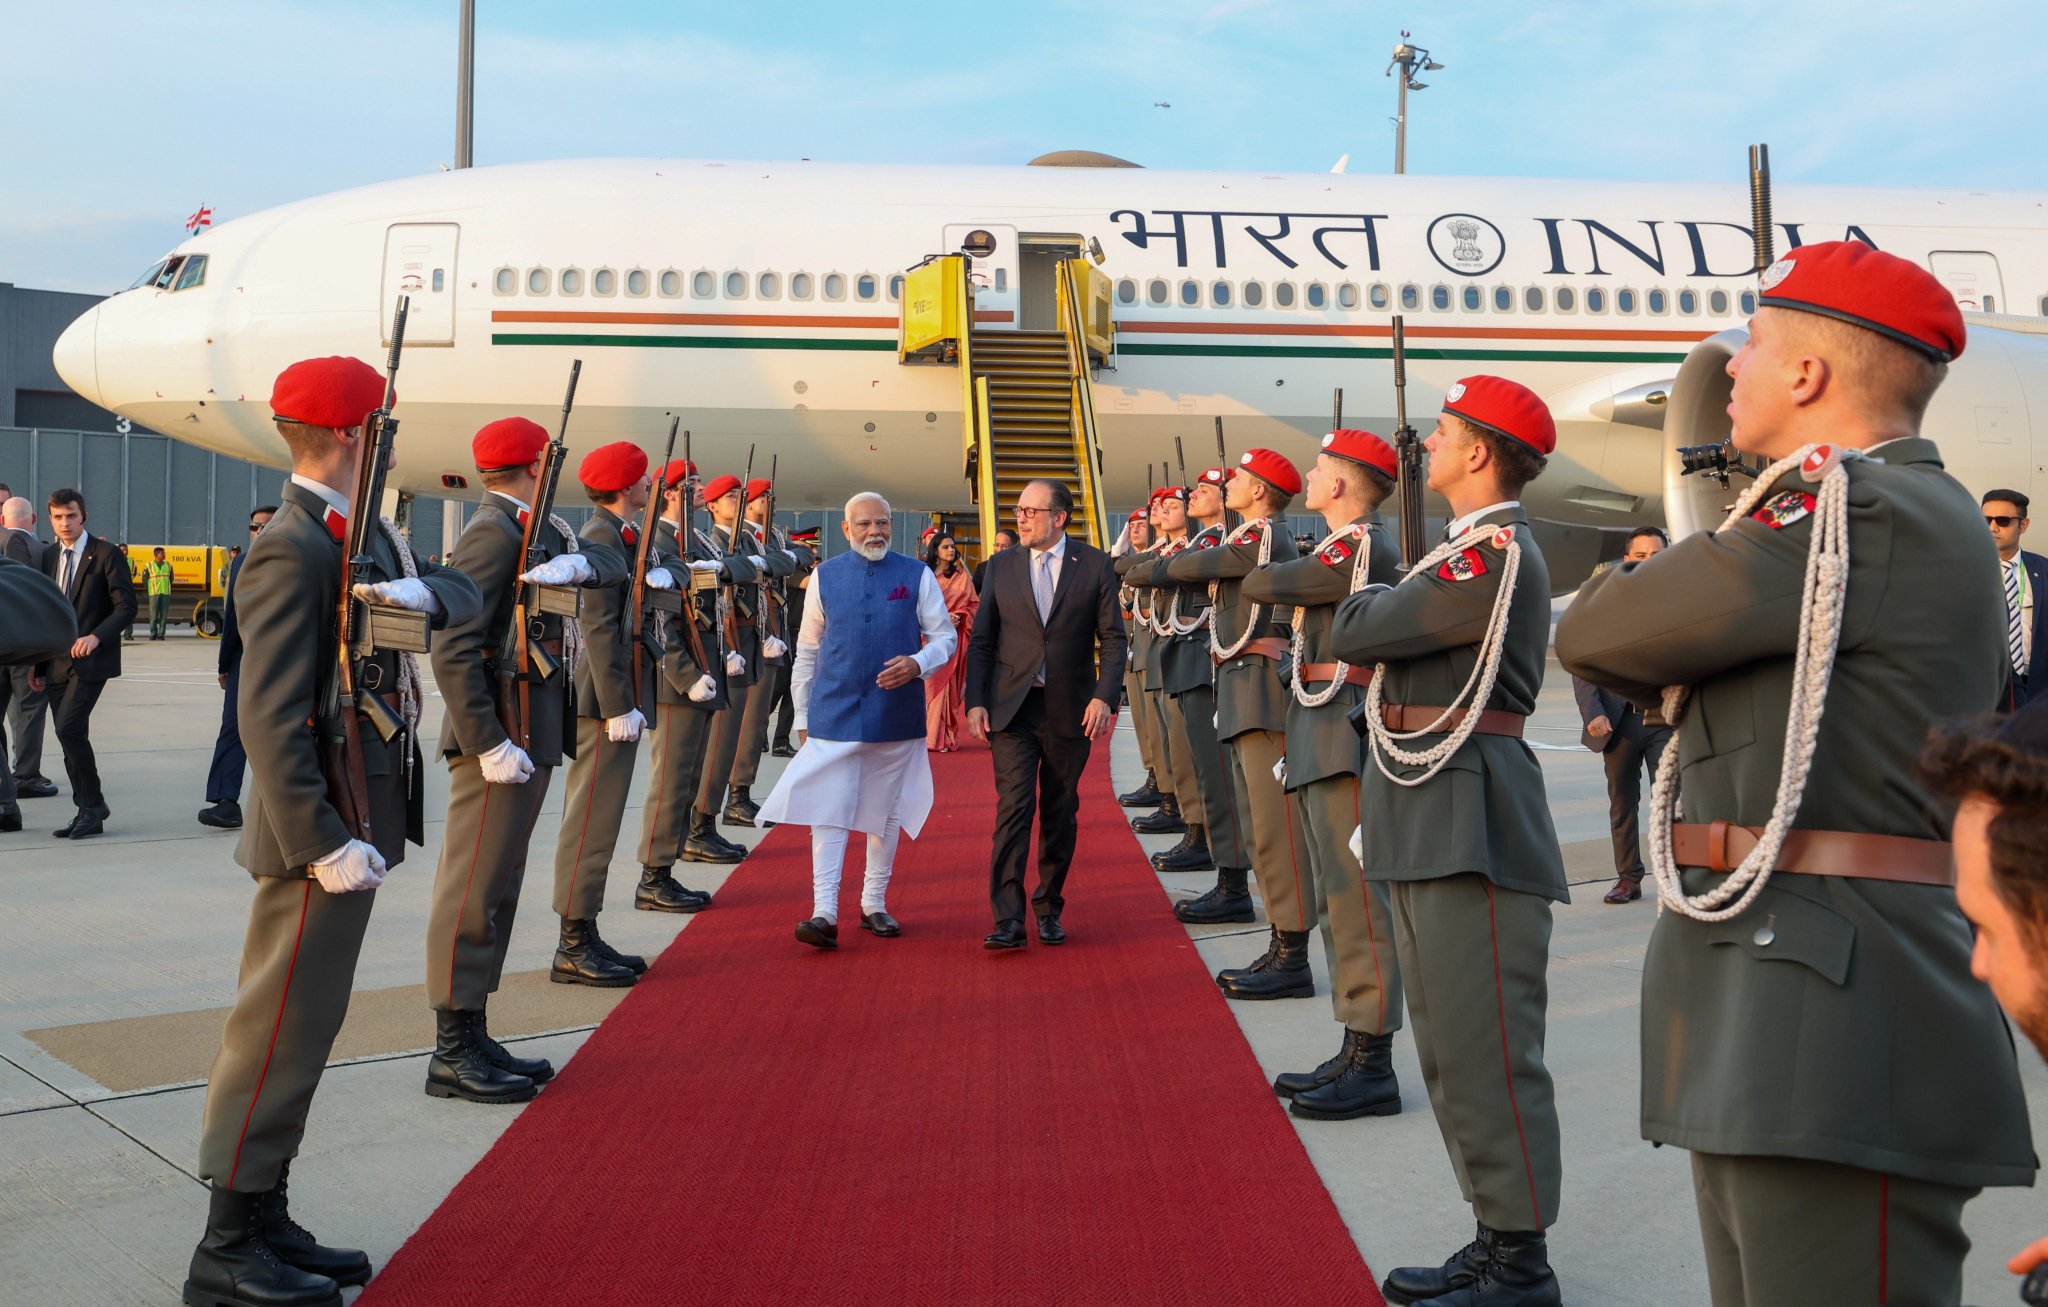 Glimpses from PM Modi arrival in Vienna, Austria. During his visit, the PM will hold talks with Chancellor Karl Nehammer and take part in various programmes.- PMO India